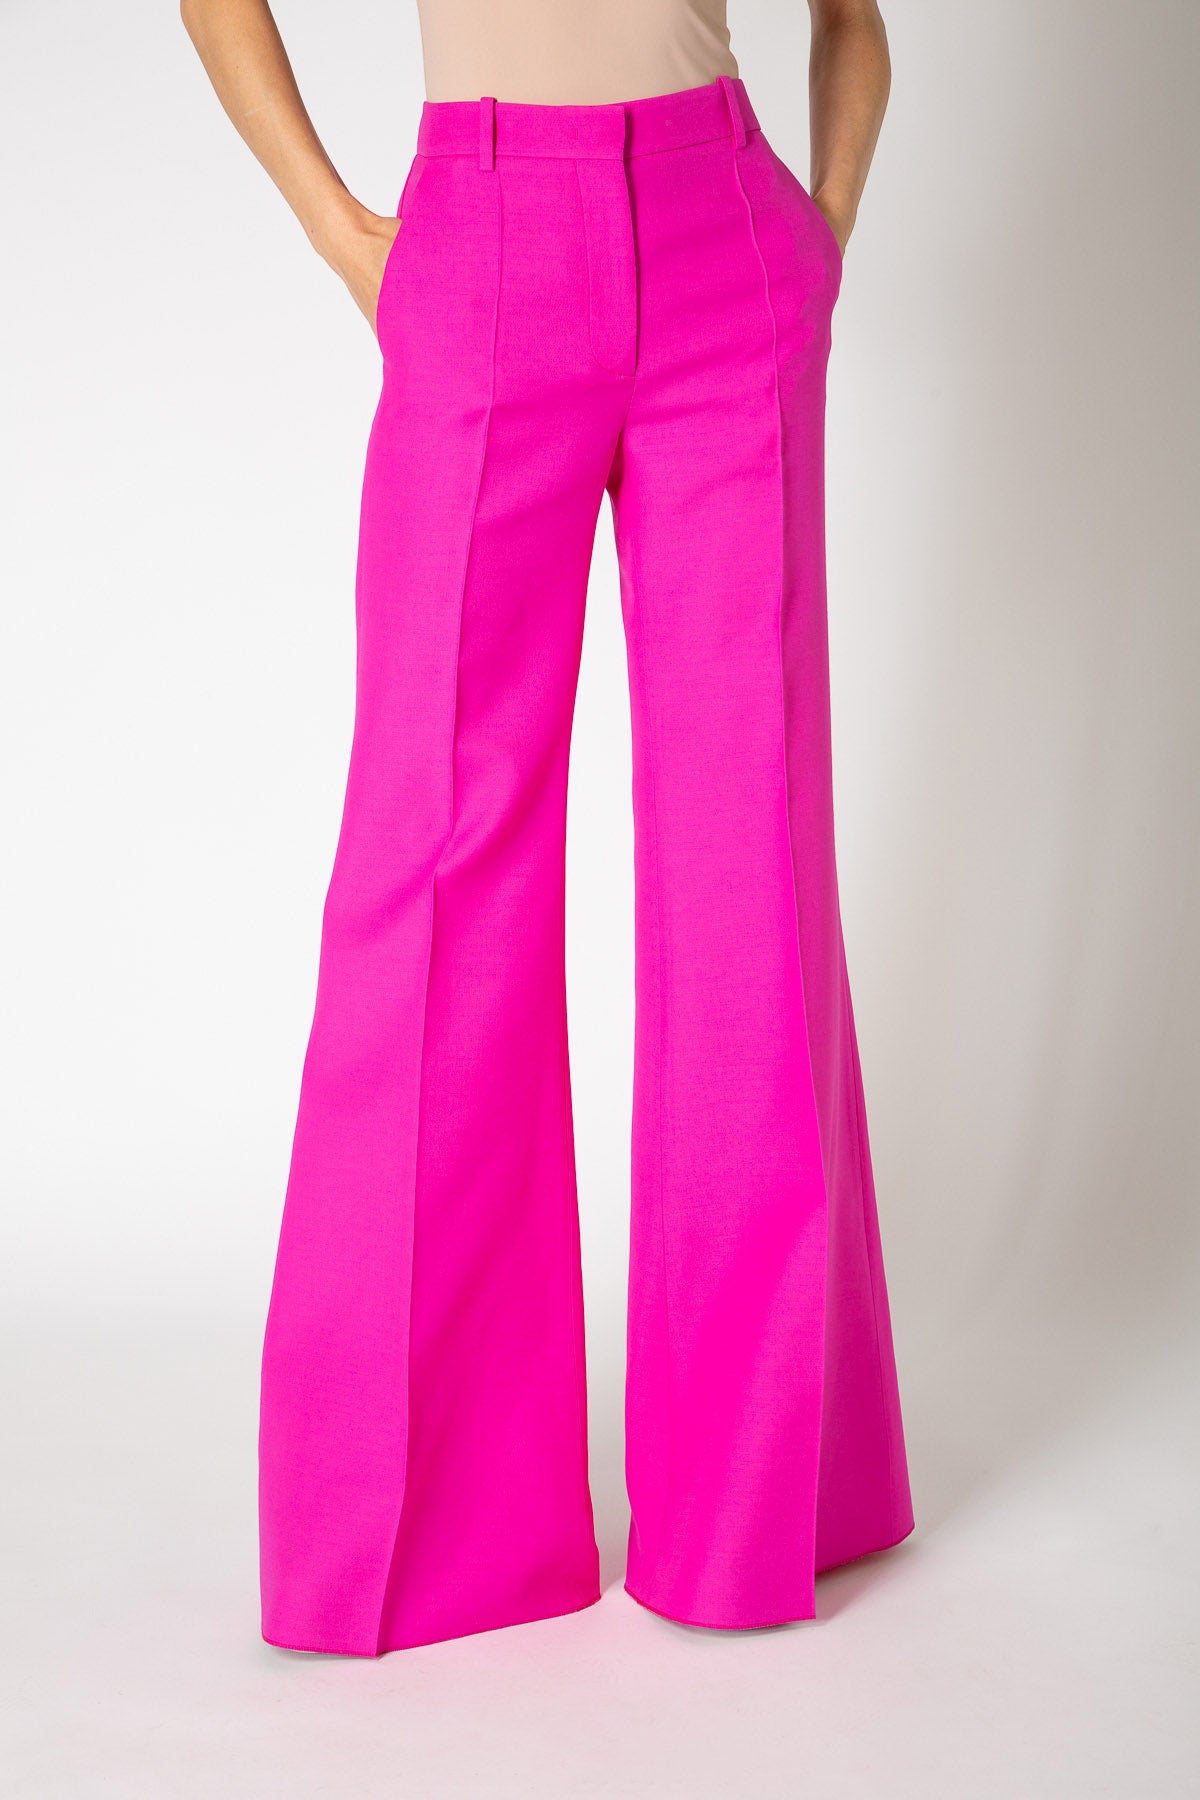 VALENTINO | CREPE COUTURE TROUSERS